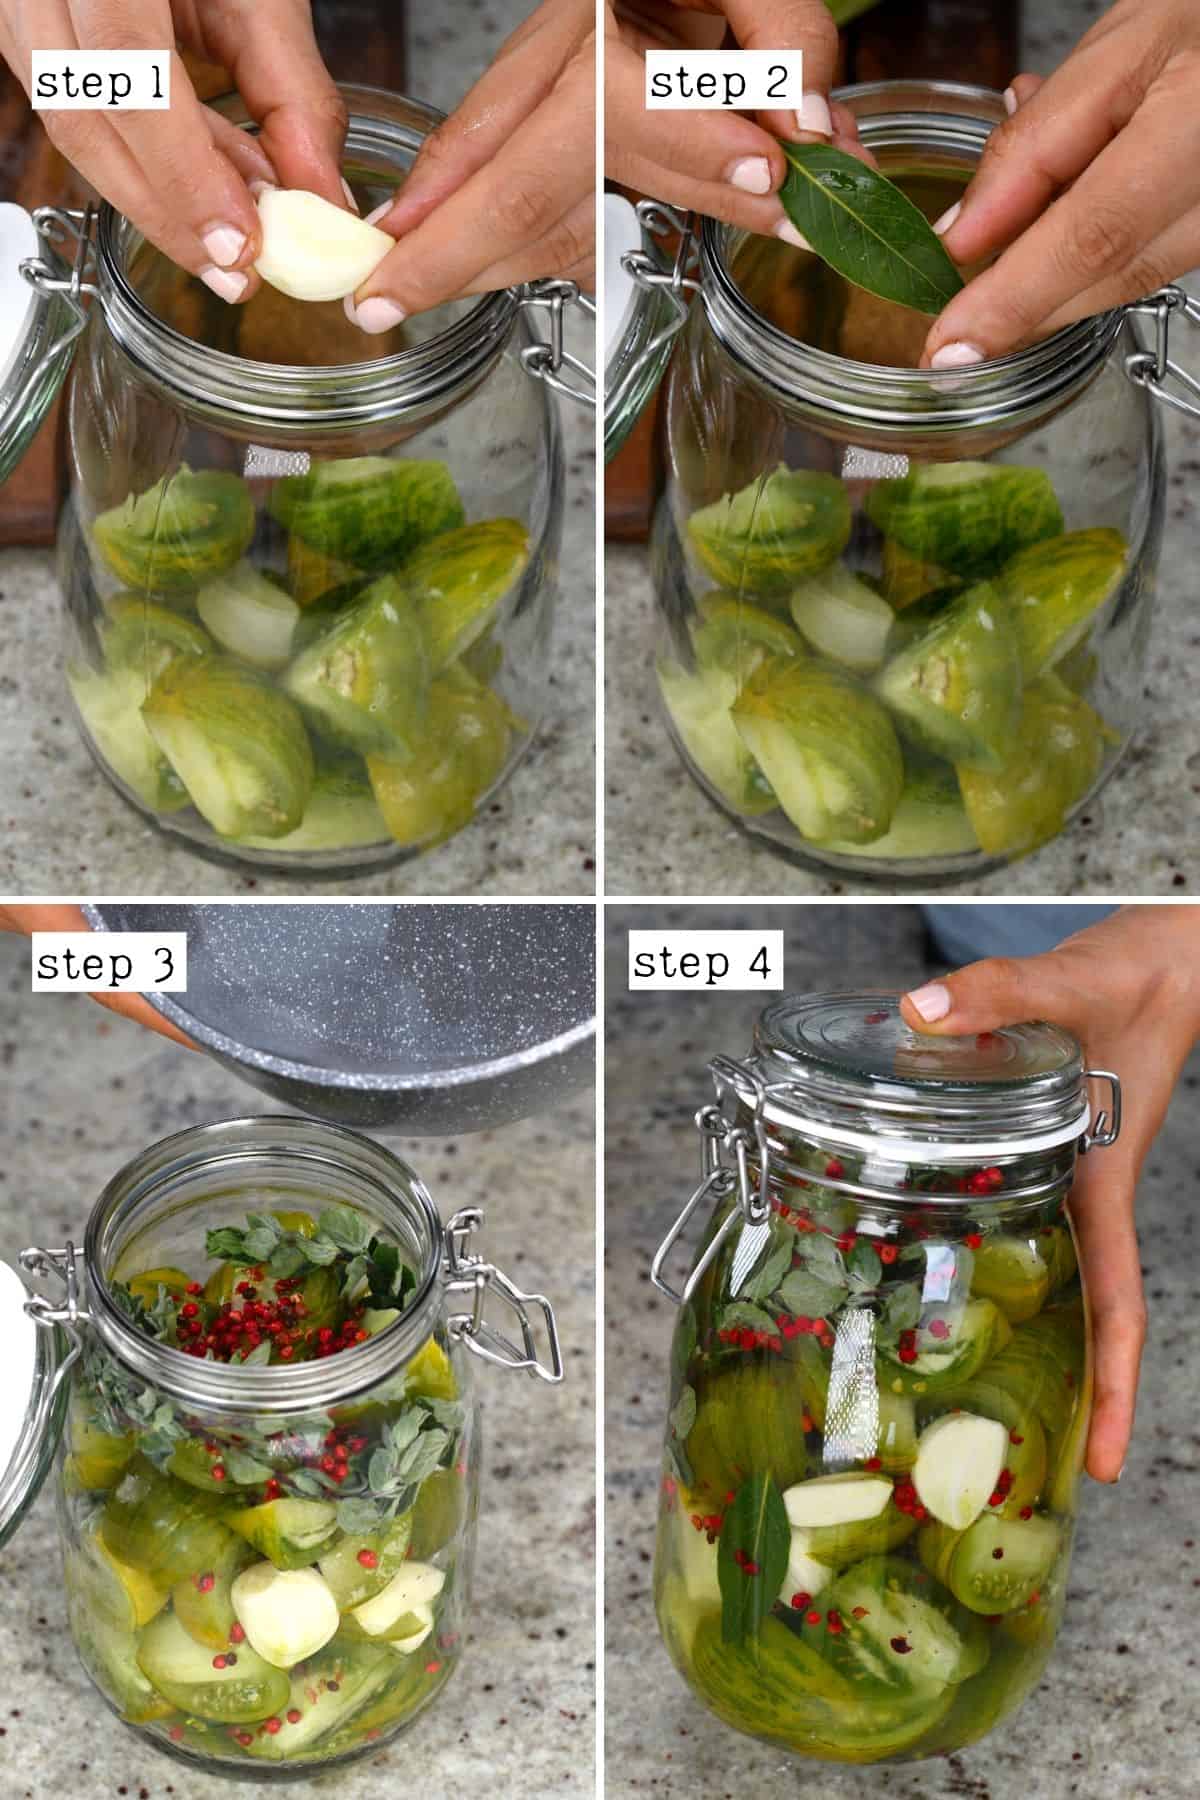 Steps for making pickled green tomatoes